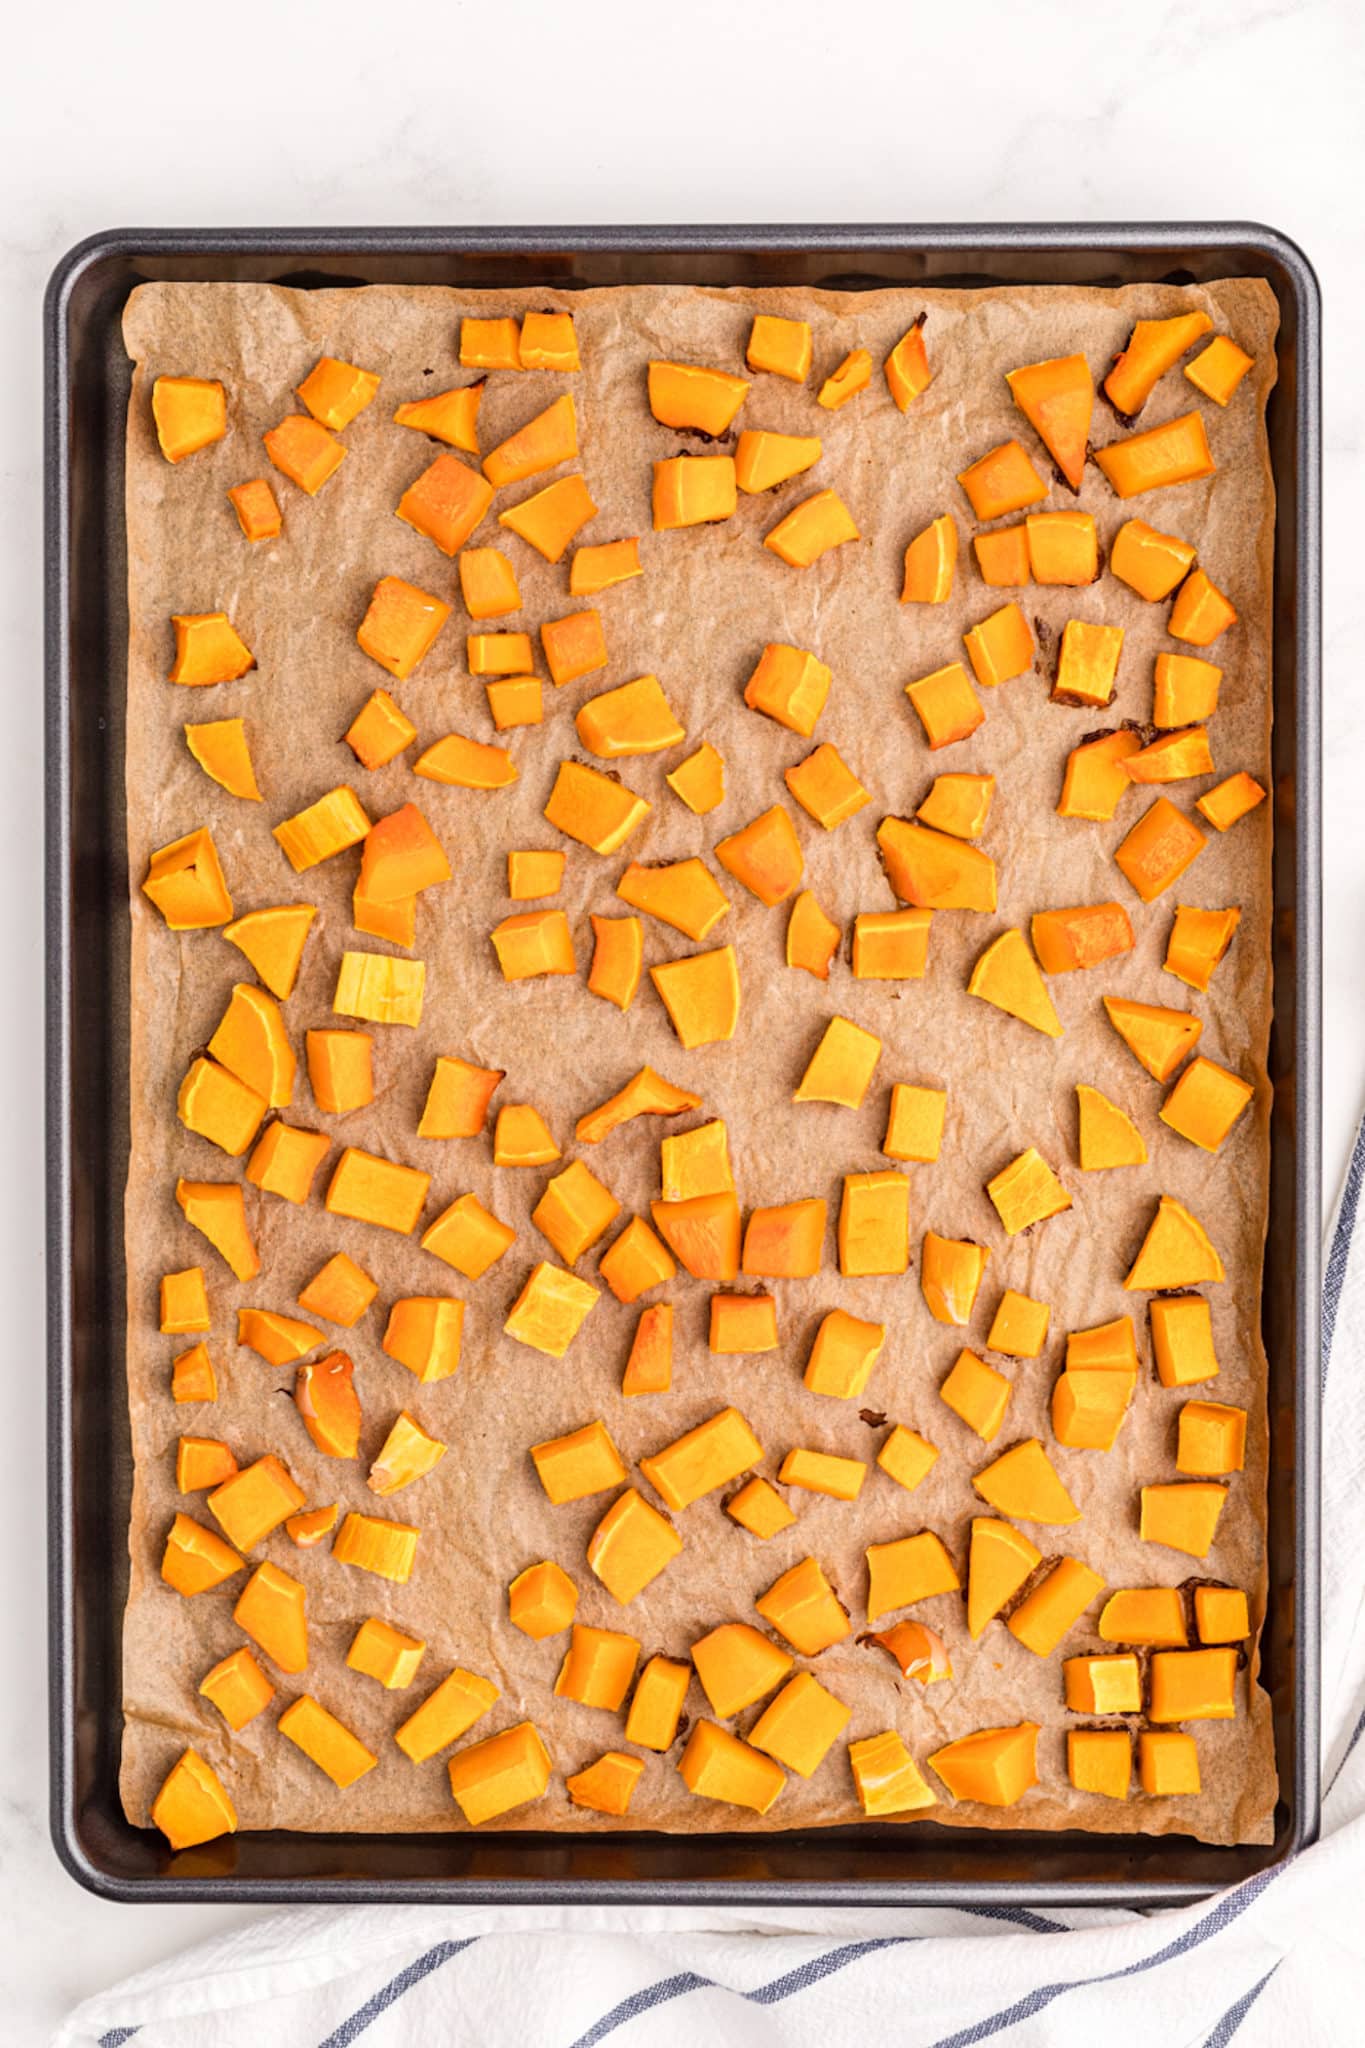 roasted squash pieces on a baking sheet.